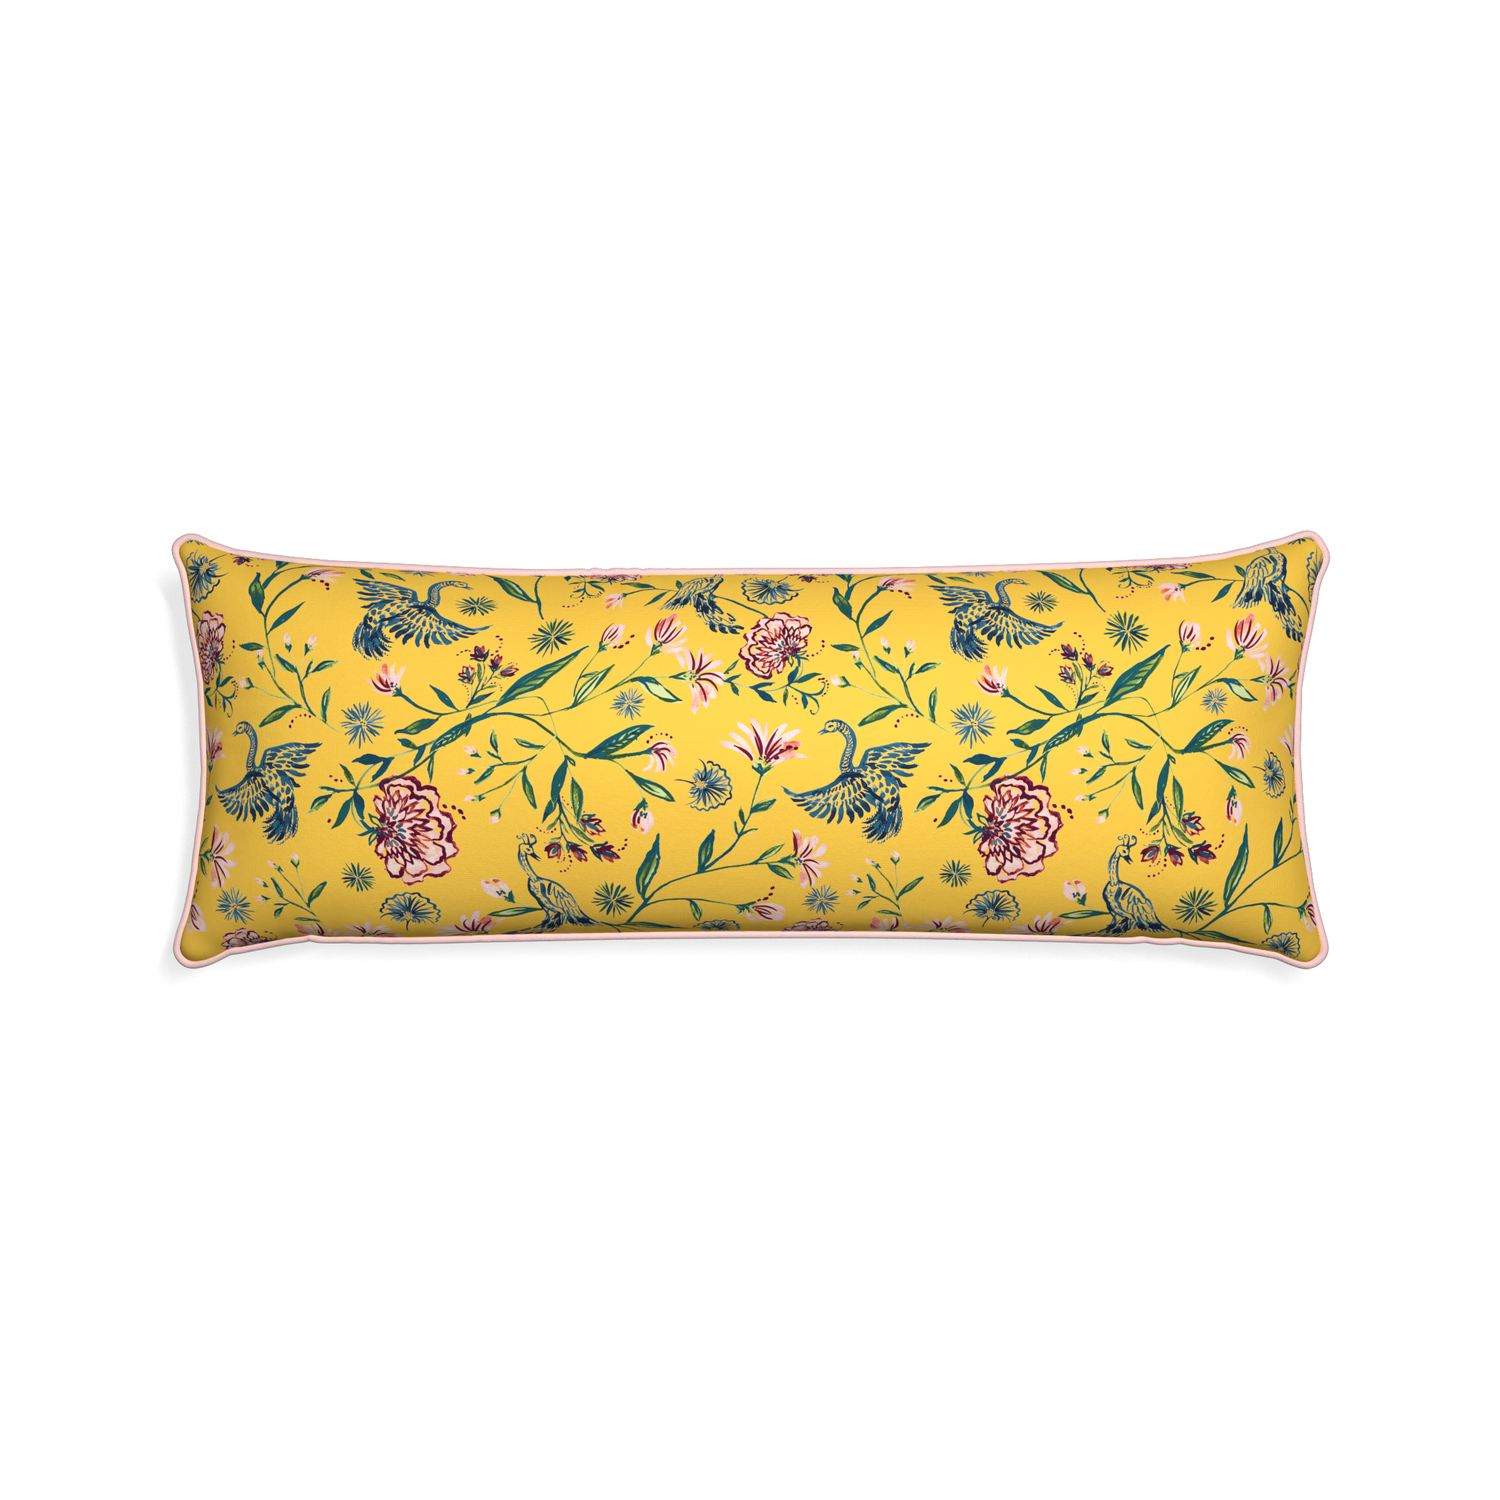 Xl-lumbar daphne canary custom yellow chinoiseriepillow with petal piping on white background